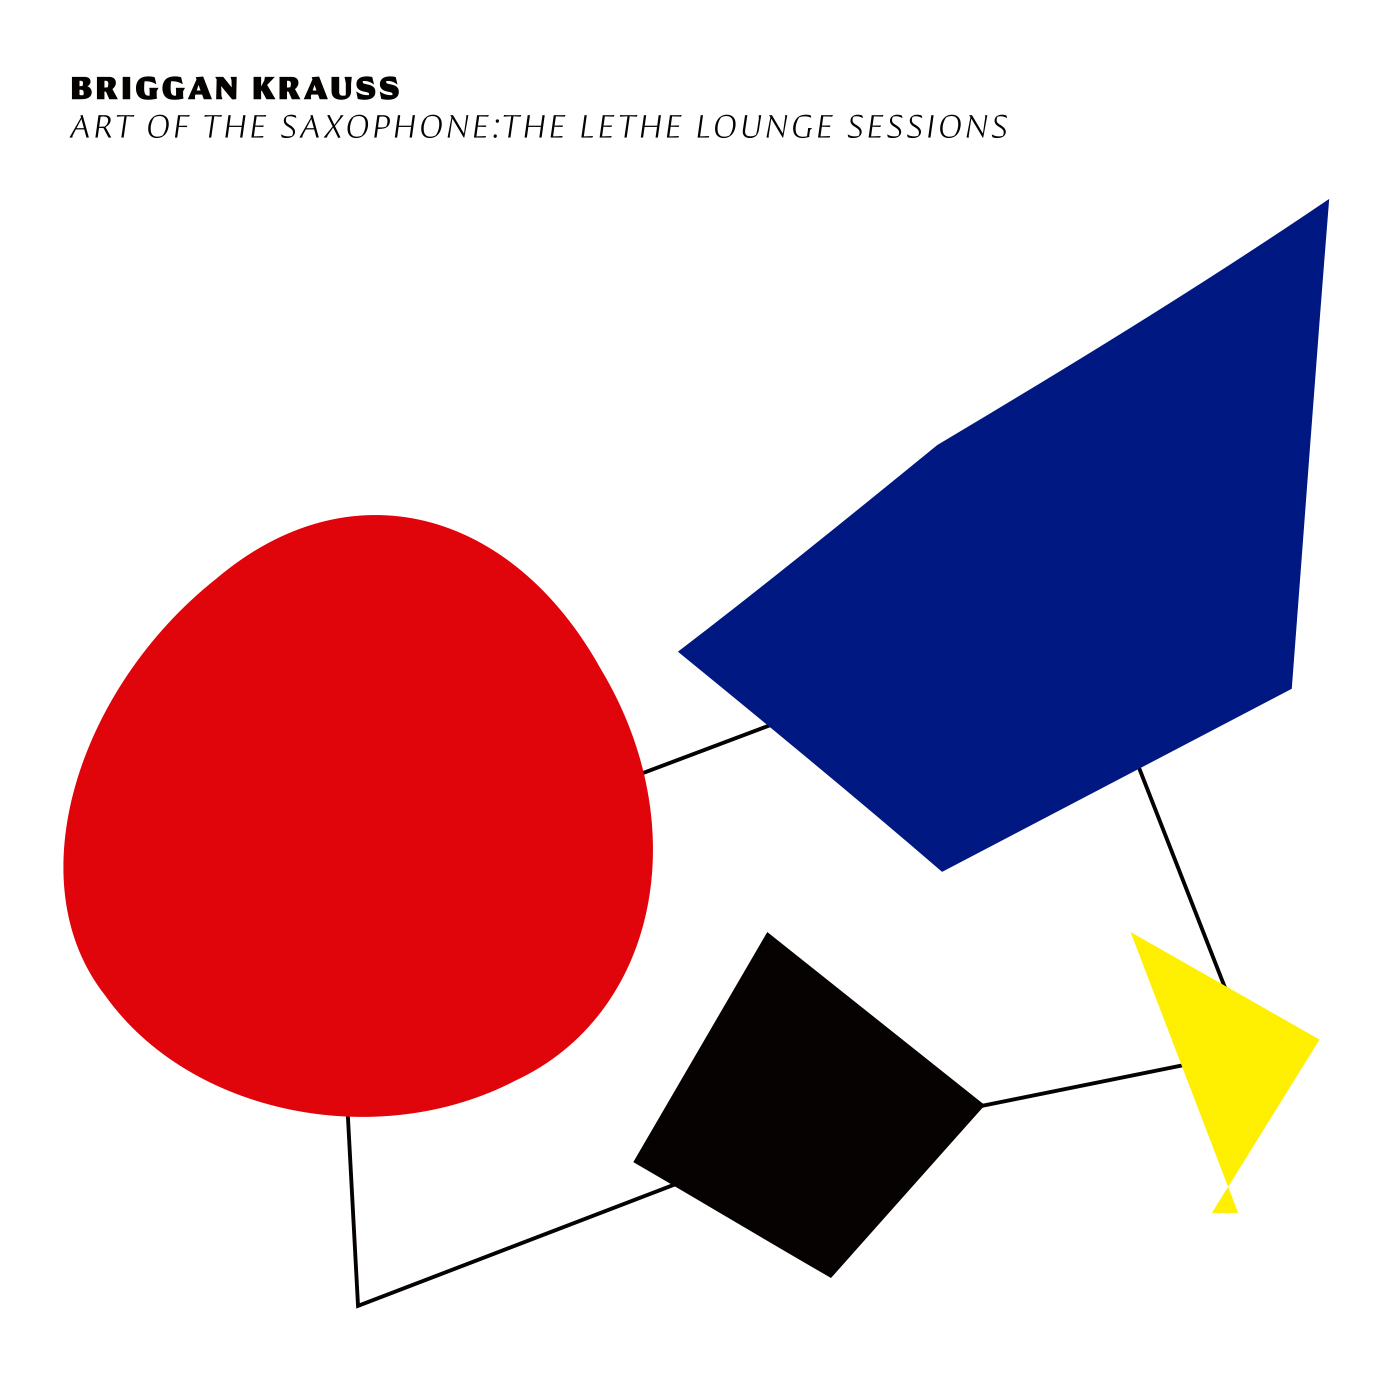 Art of the Saxophone: The Lethe Lounge Sessions by Briggan Krauss